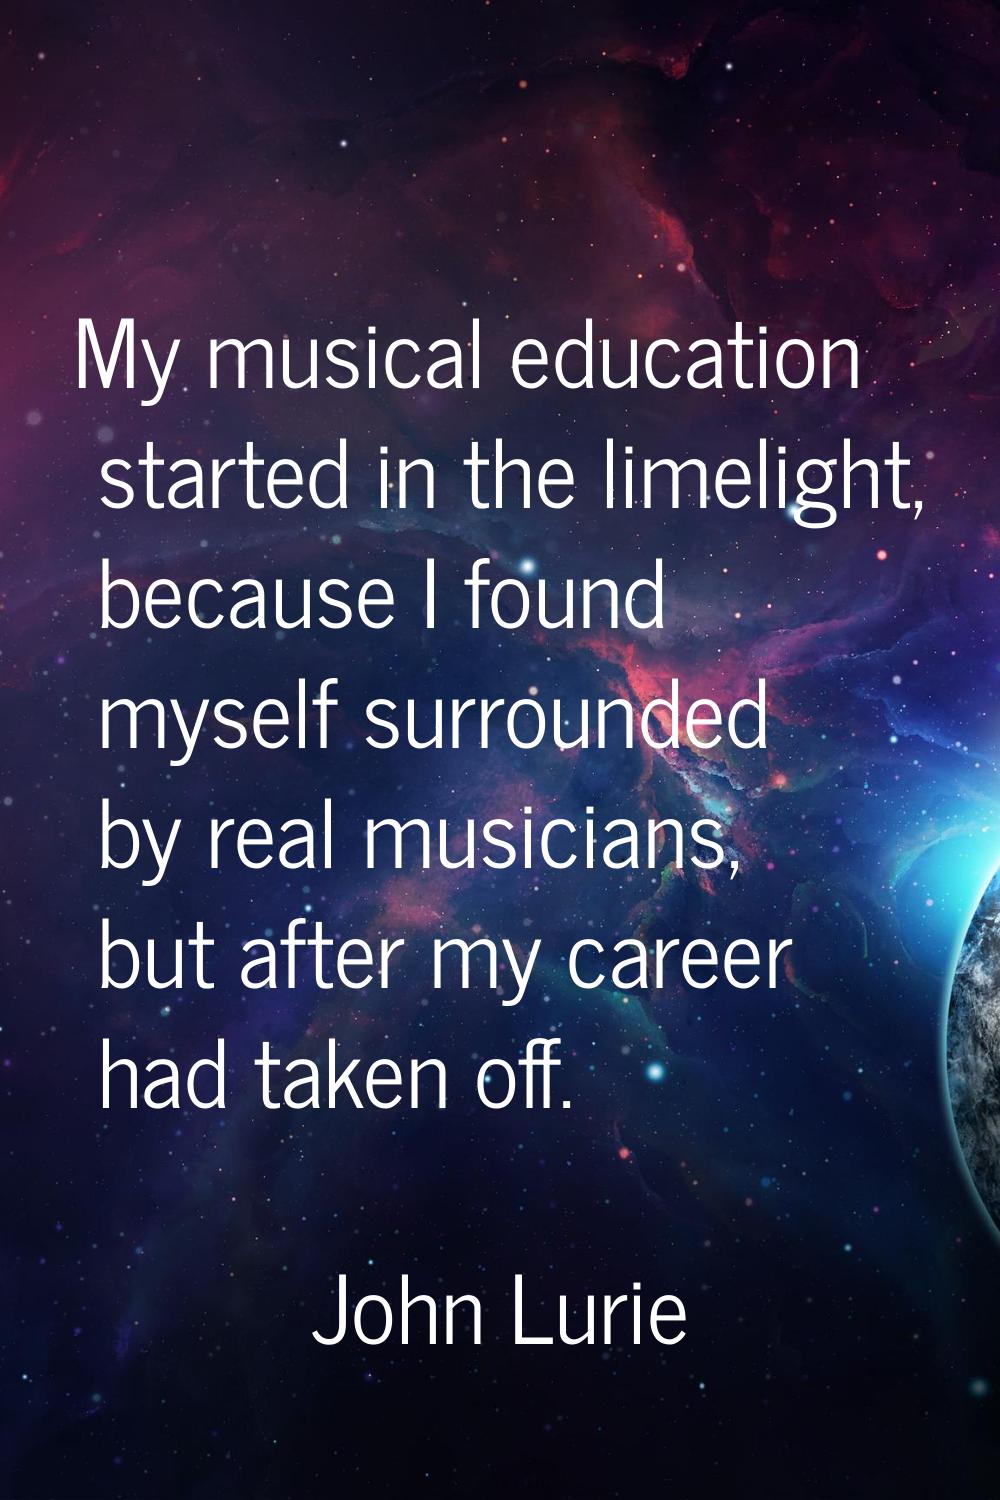 My musical education started in the limelight, because I found myself surrounded by real musicians,